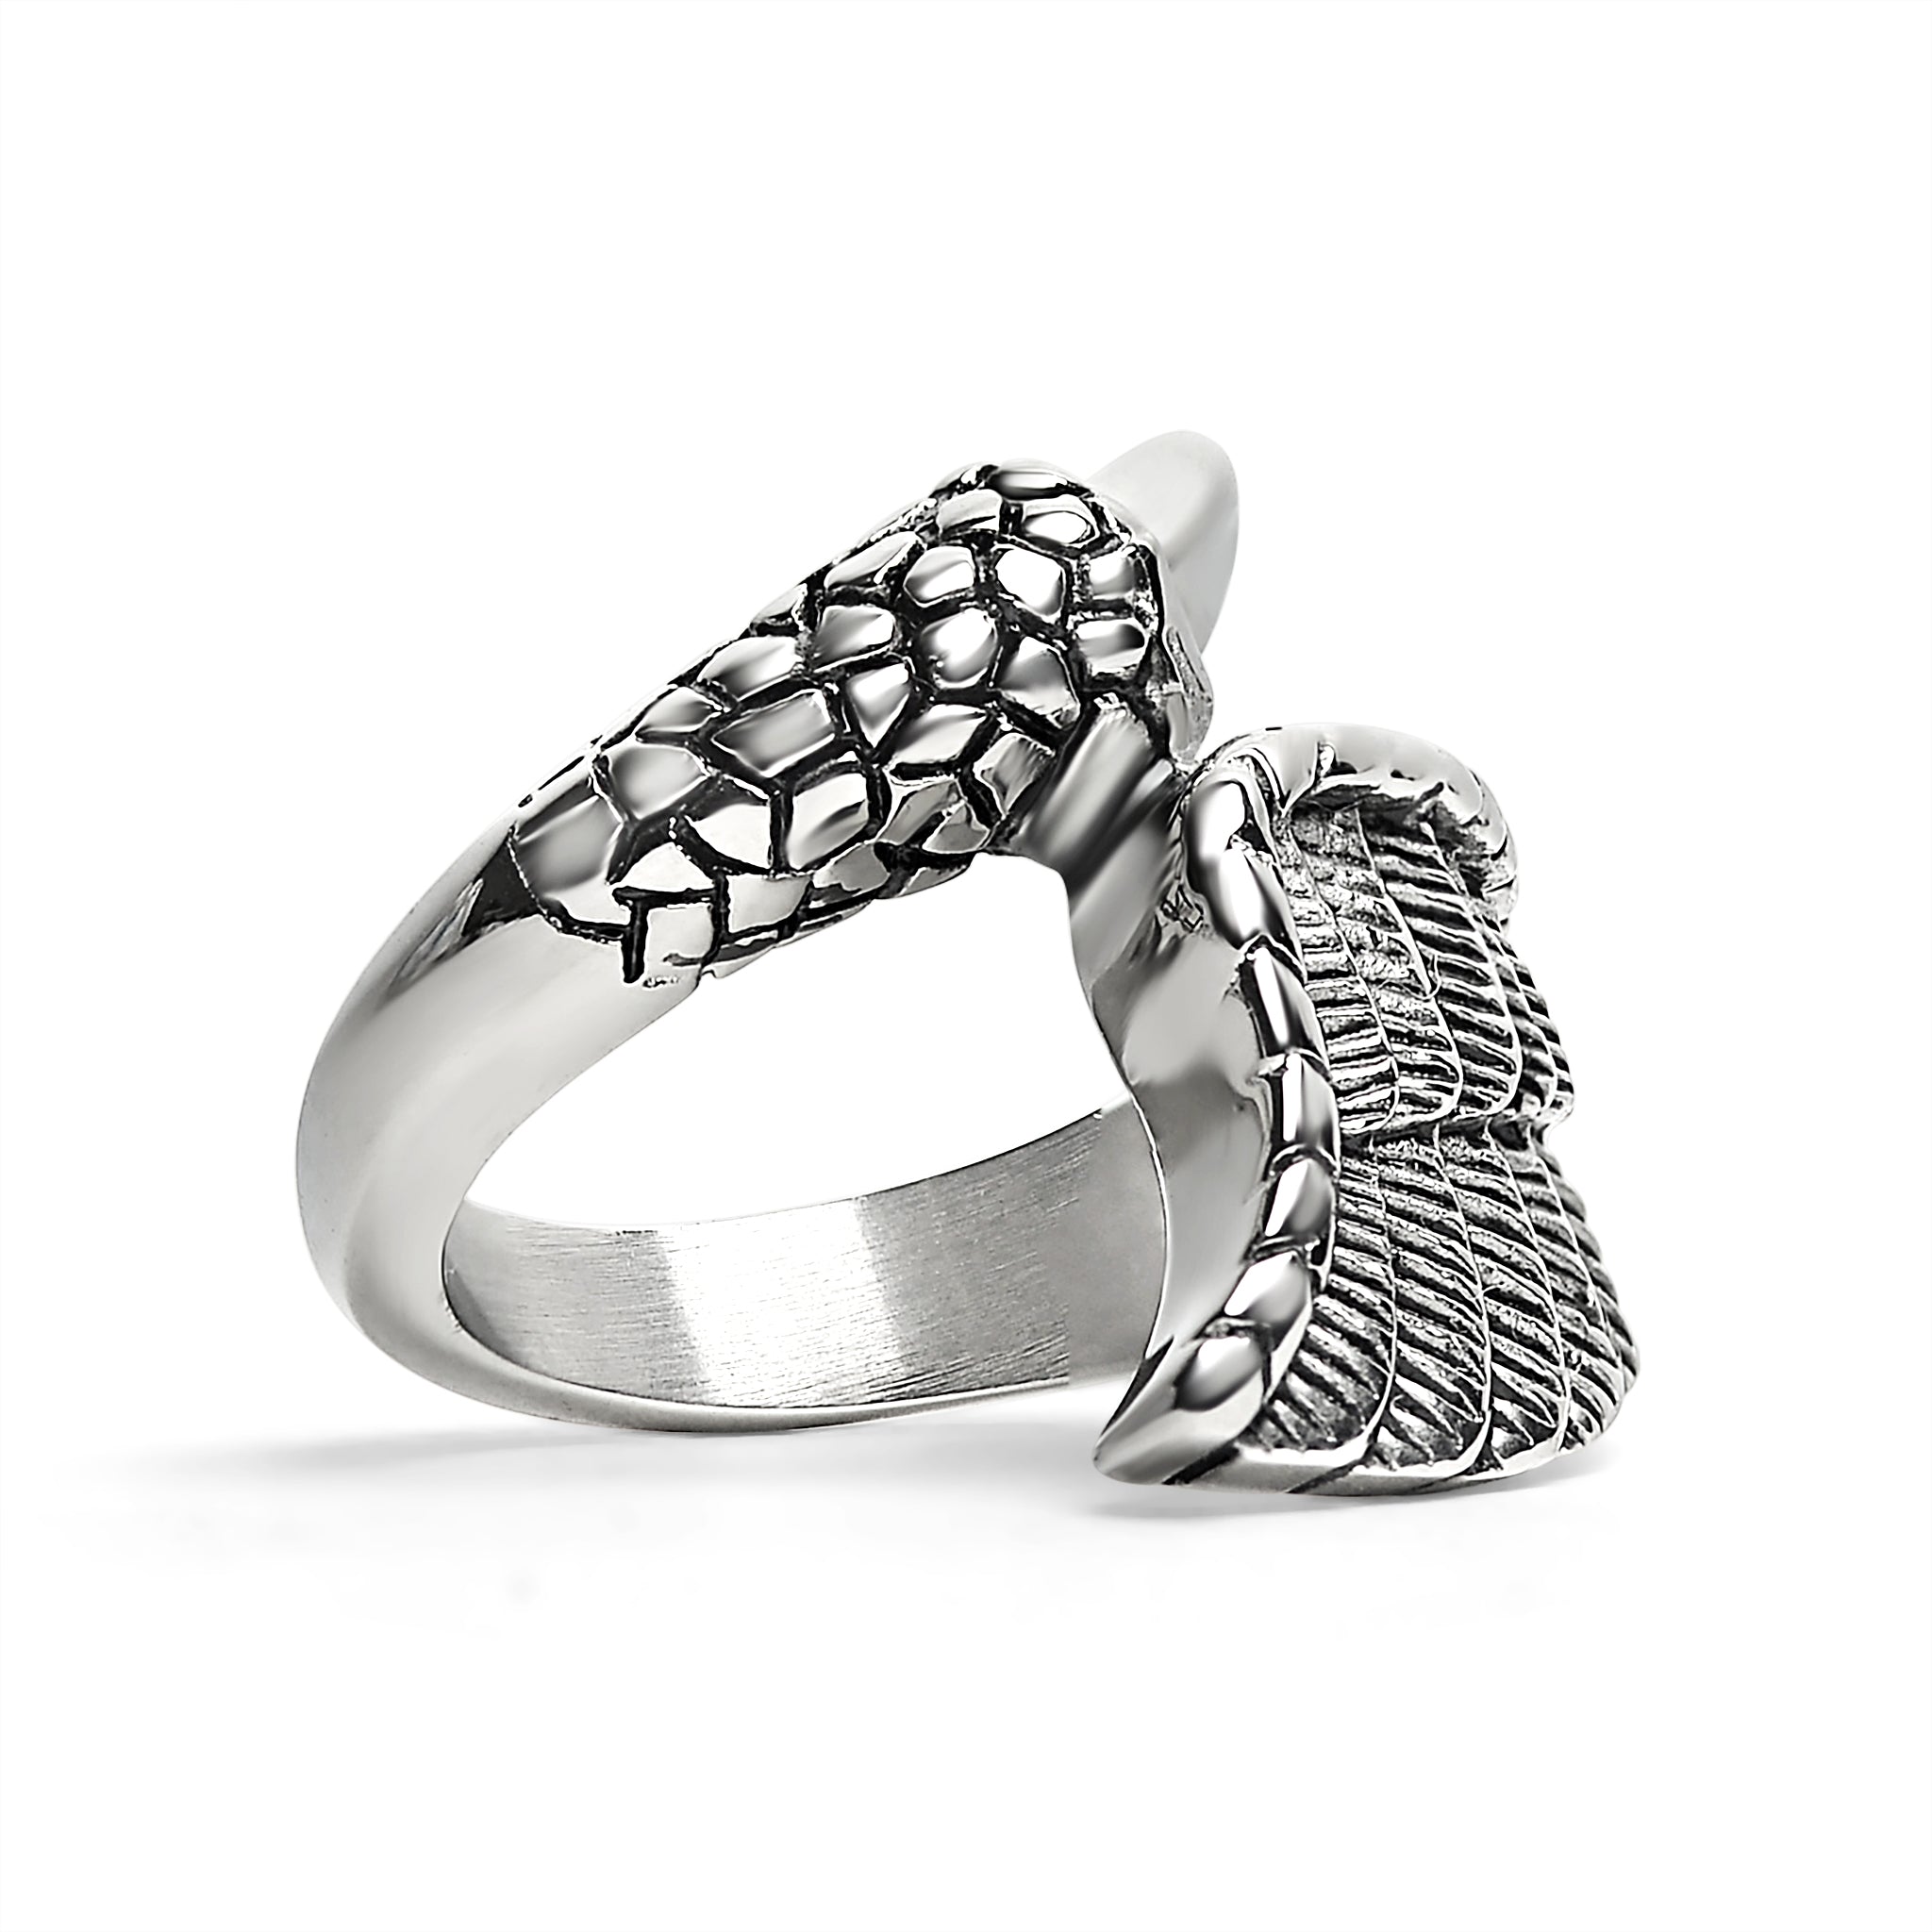 Syfer Dragon claw ring, Dragon ring for Men and Women, Ring for Rapper,  Biker Stainless Steel Silver Plated Ring - Price History